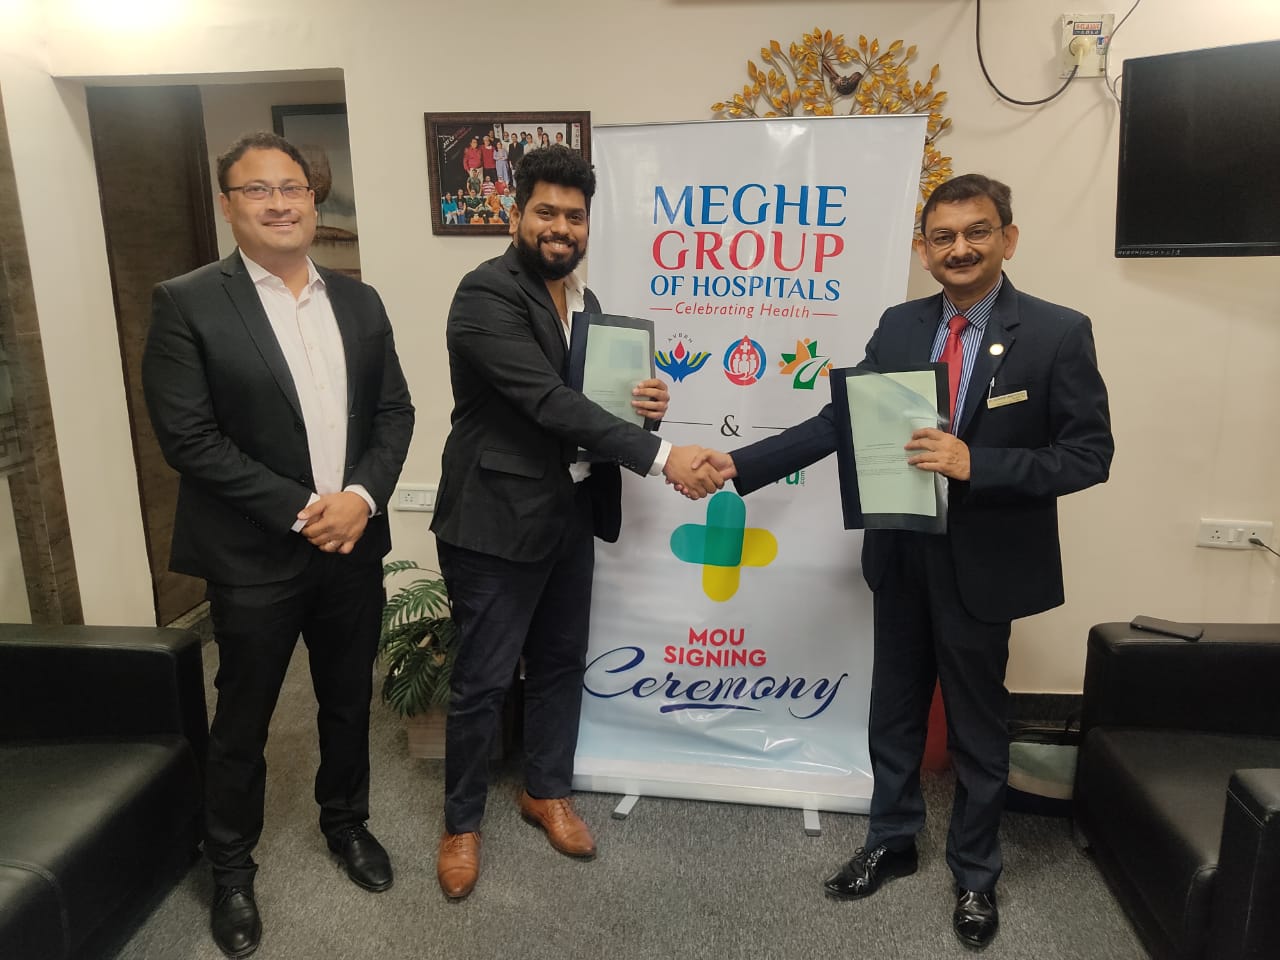 Meghe Group of Hospitals announces partnership with ImpactGuru.com to make healthcare accessible and affordable for all